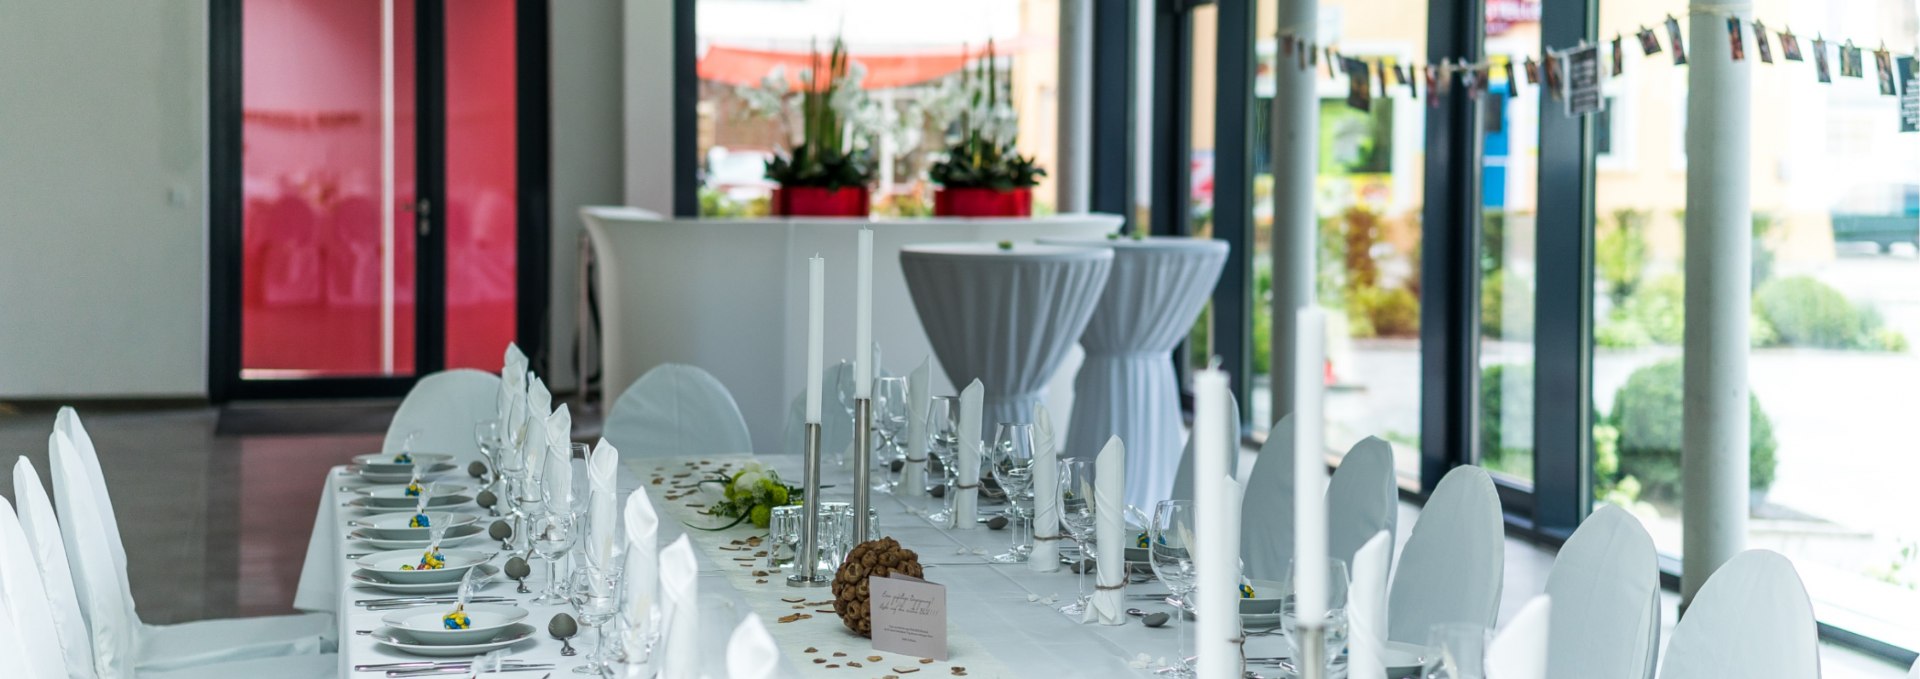 Plenty of space for parties, celebrations and meetings at the Hotel Mecklenburger Hof., © Hotel und Pension in der Nudeloper